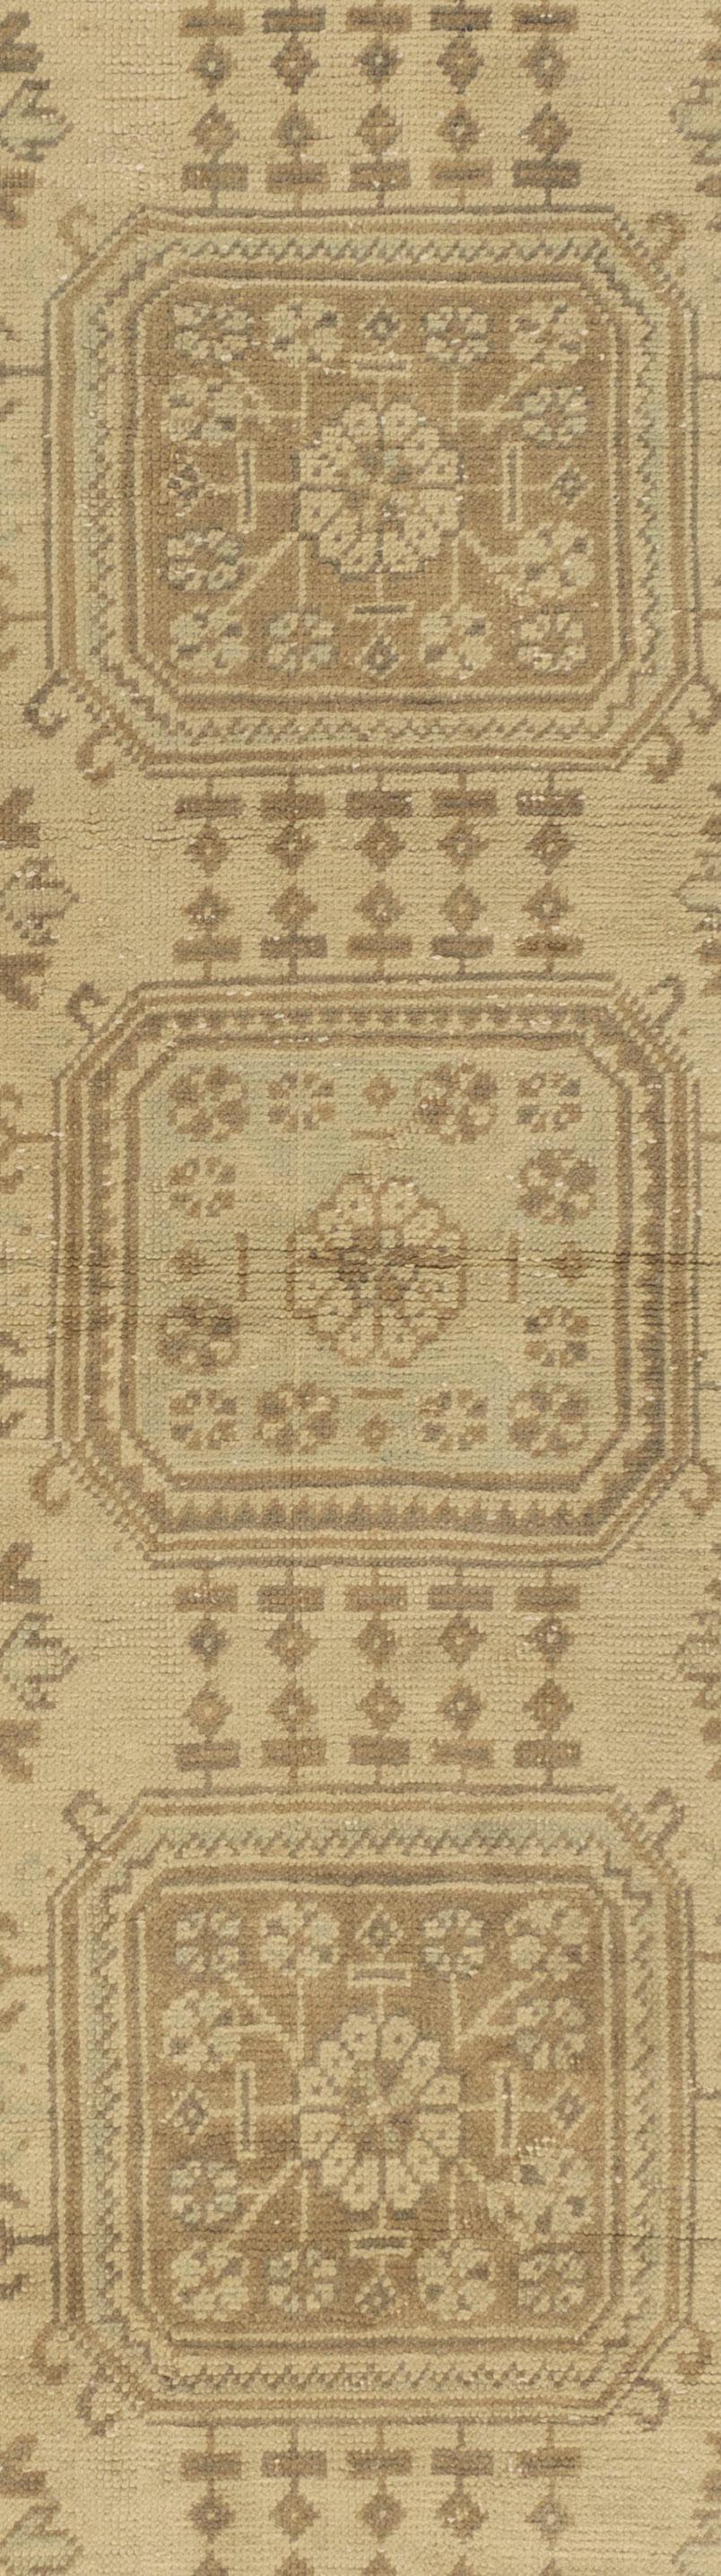 Vintage Turkish Oushak Runner 2'10 X 11'. Even today, Oushak rugs are still the first choice of professional interior designers. Sometimes this is because when grading Oushak carpets, carpet connoisseurs will not only look at the overall quality of